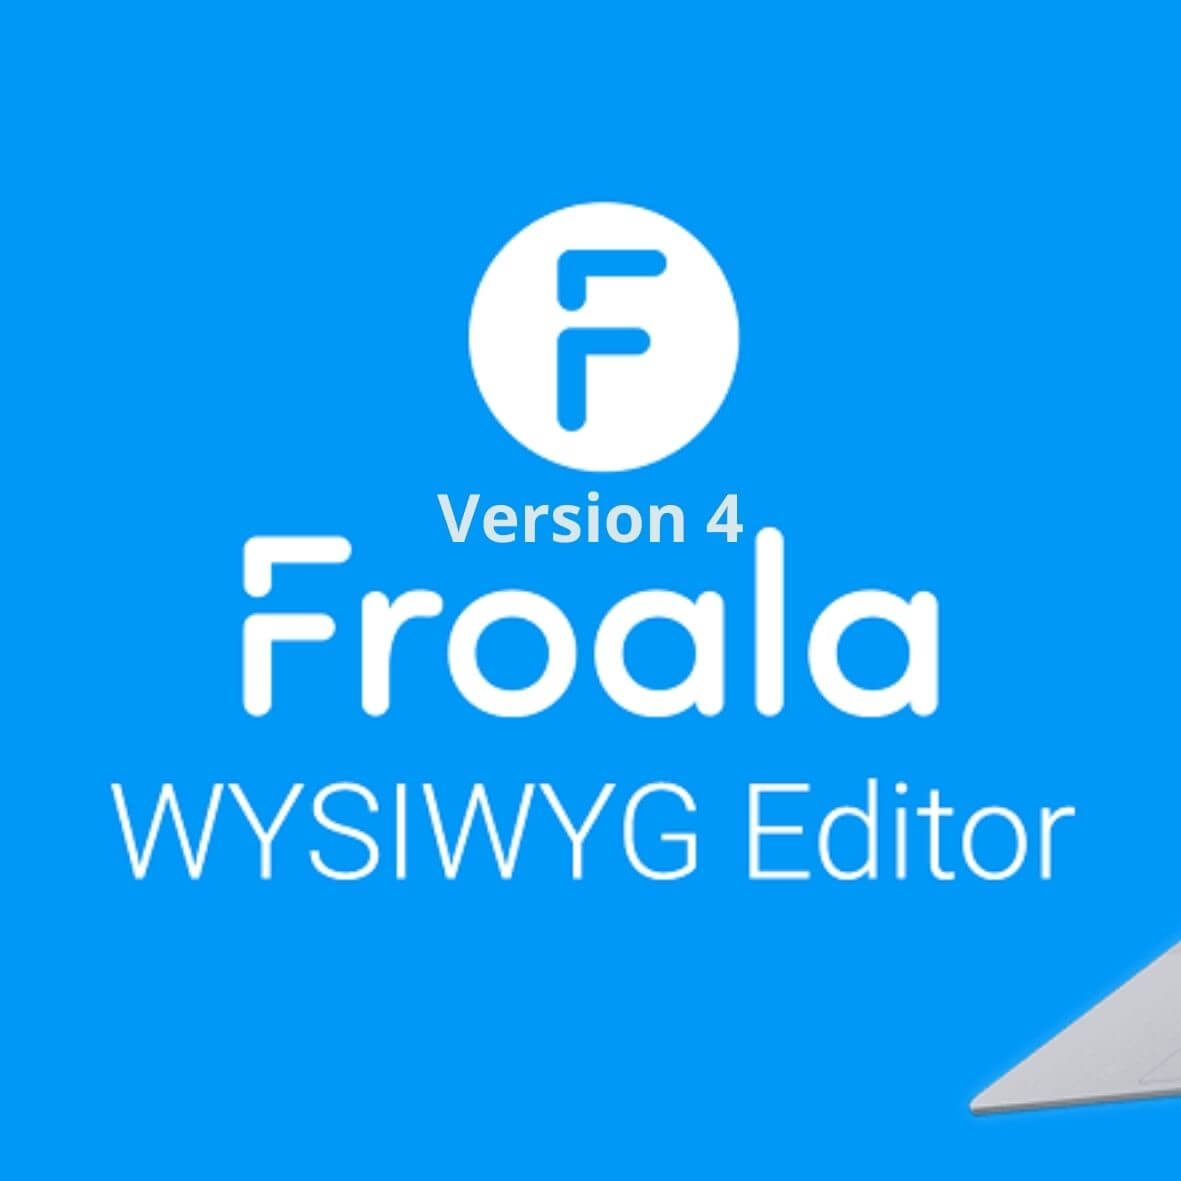 Froala Editor Version 4, highlighting its new features and improvements.